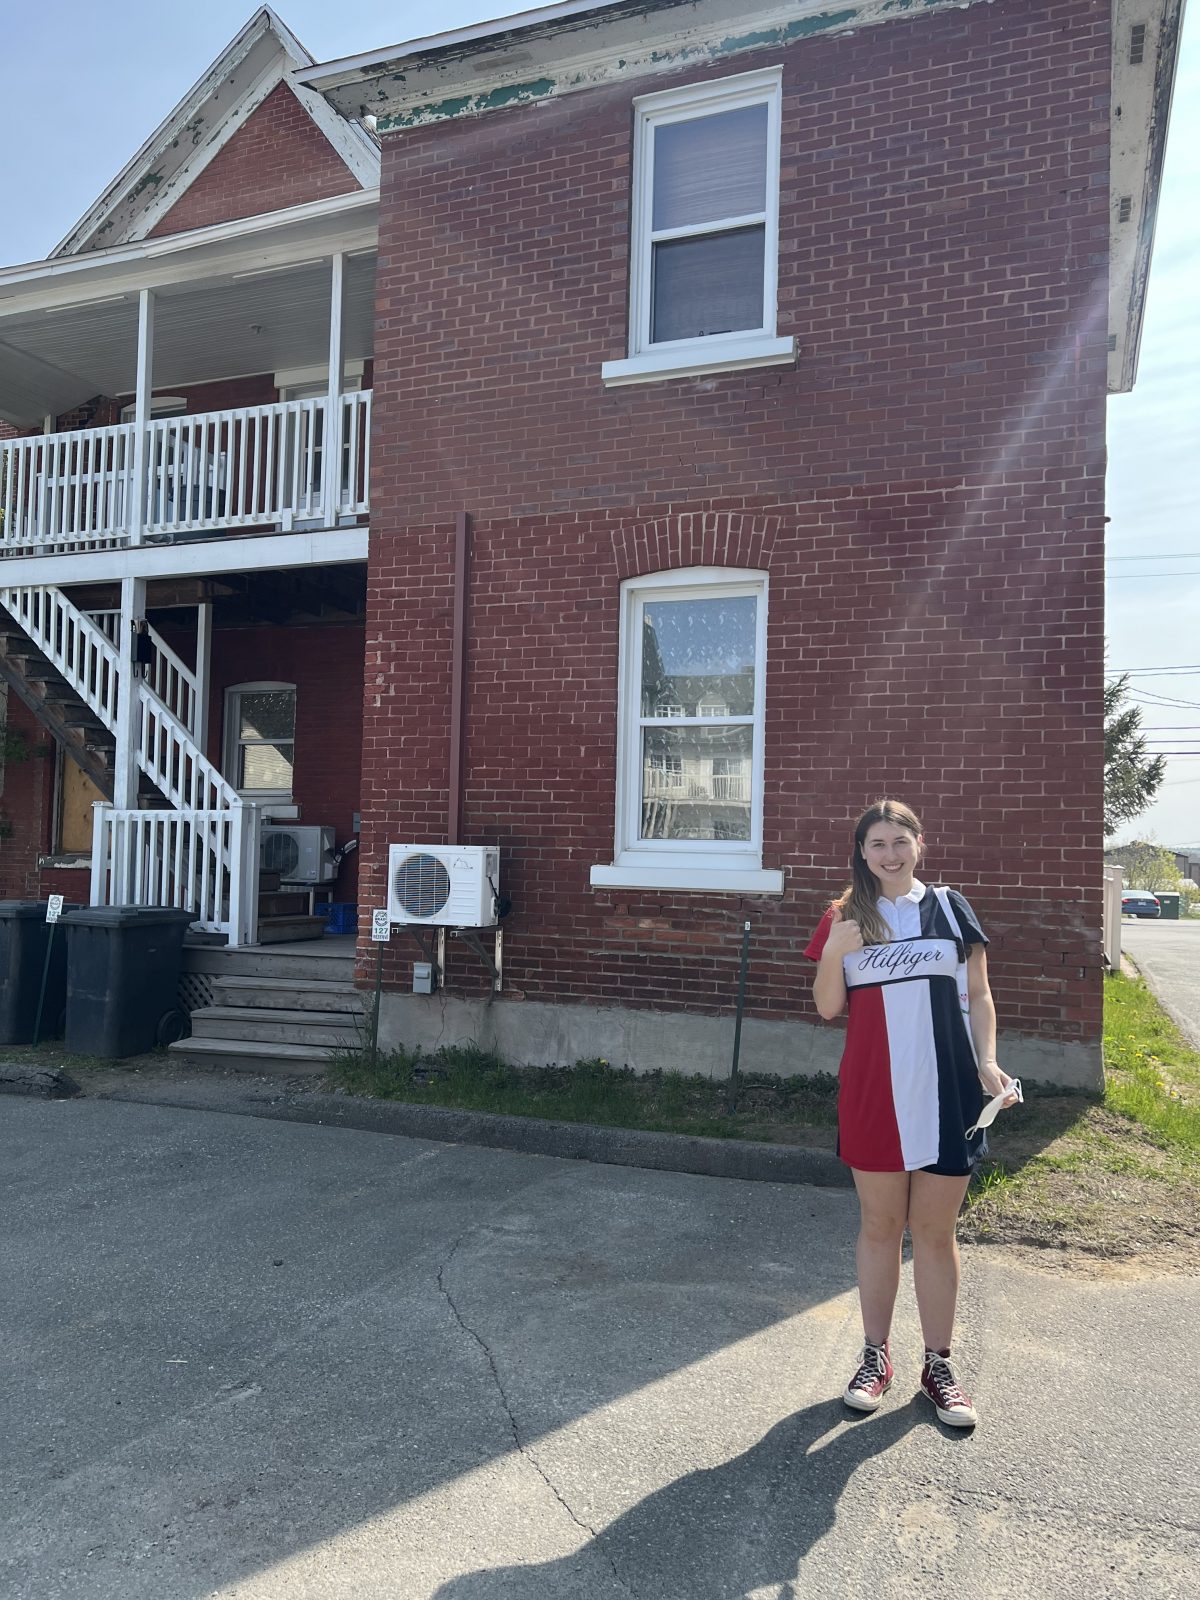 Housing headaches for new students in Lennoxville